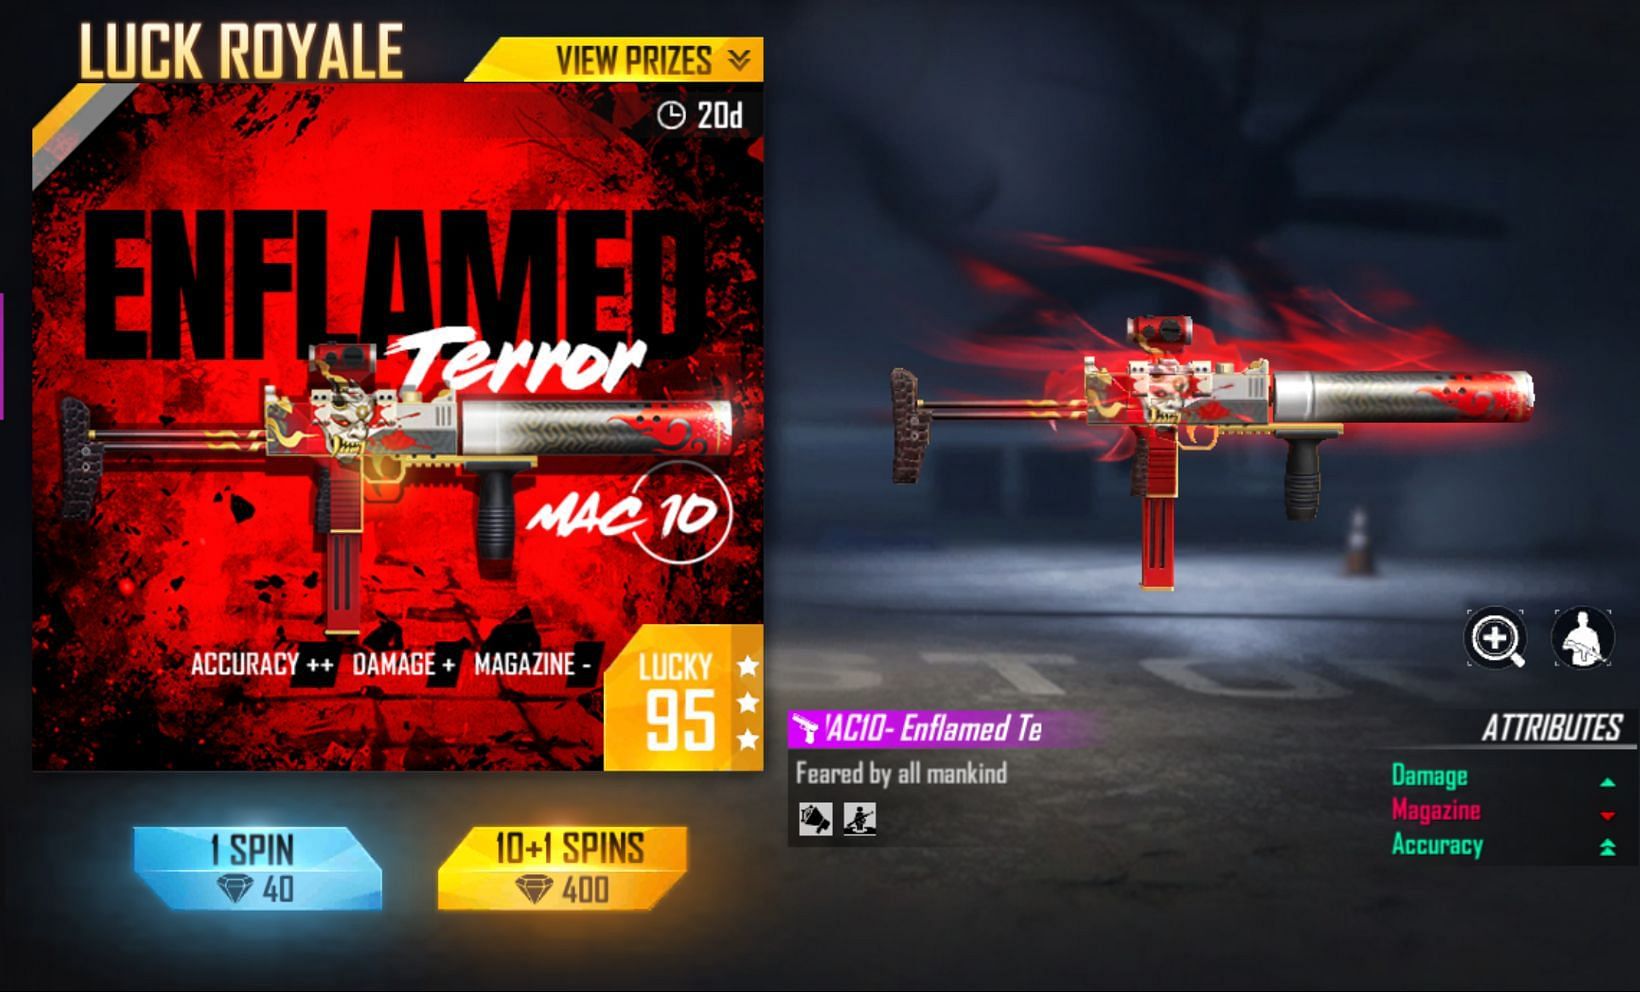 MAC10 – Enflamed Terror is up for grabs in Weapon Royale (Image via Garena)